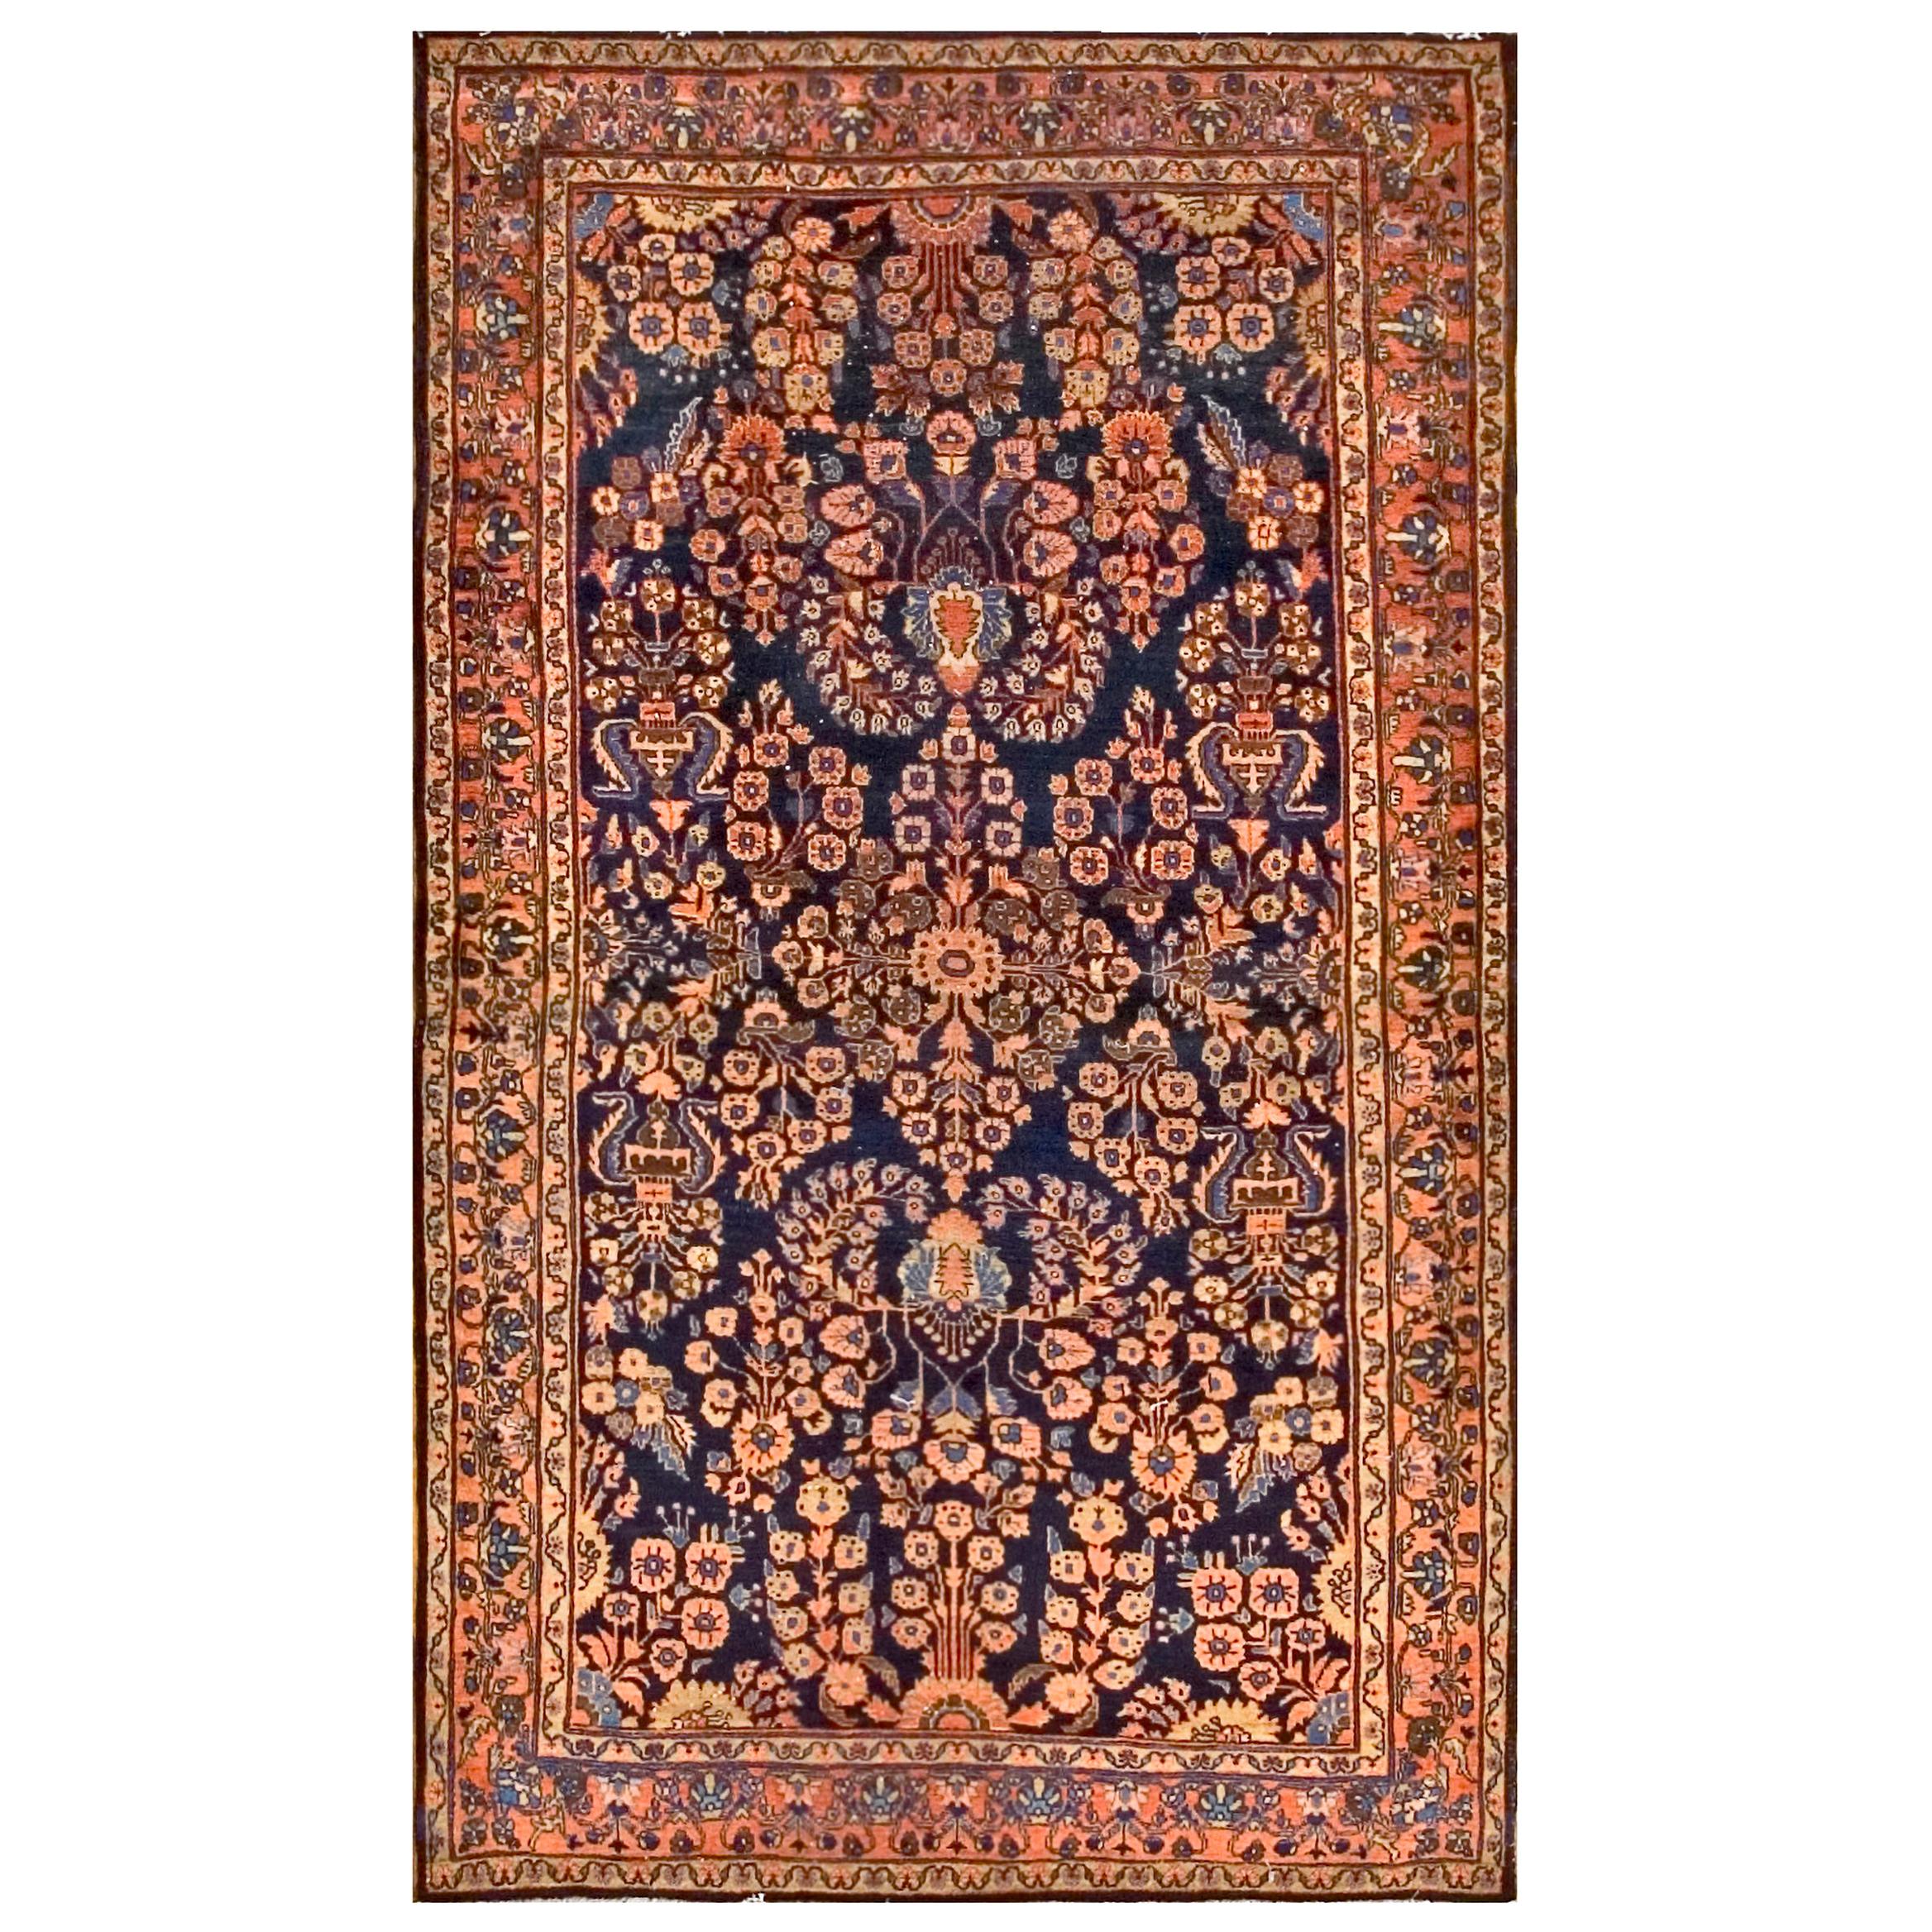 Early 20th Century Persian Sarouk Carpet ( 3'10" x 6'4" - 117 x 193 ) For Sale